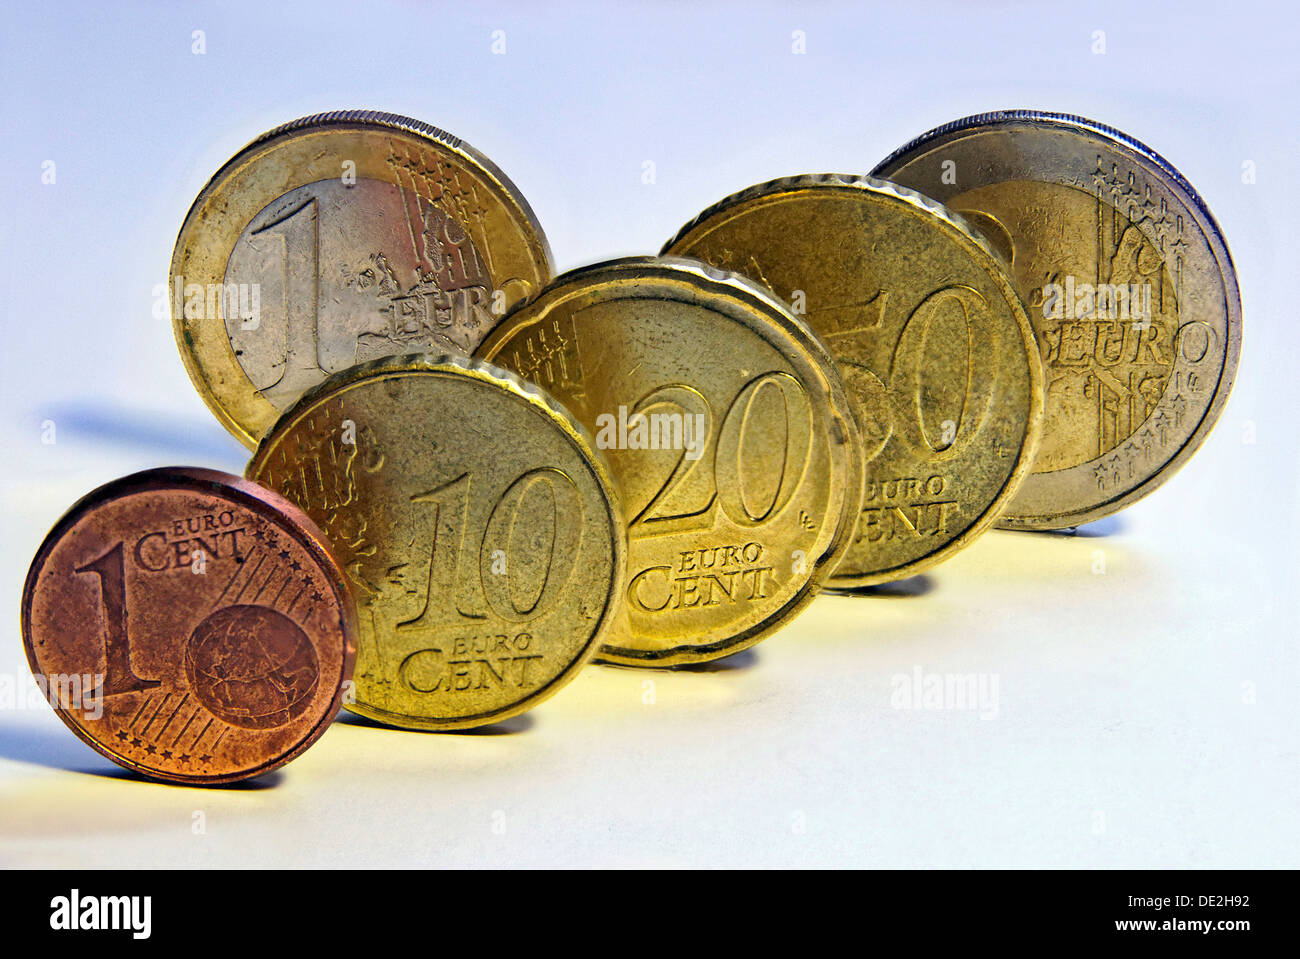 Euro coins, 1 cent, 10 cents, 20 cents, 50 cents, 1 euro and 2 euros Stock Photo